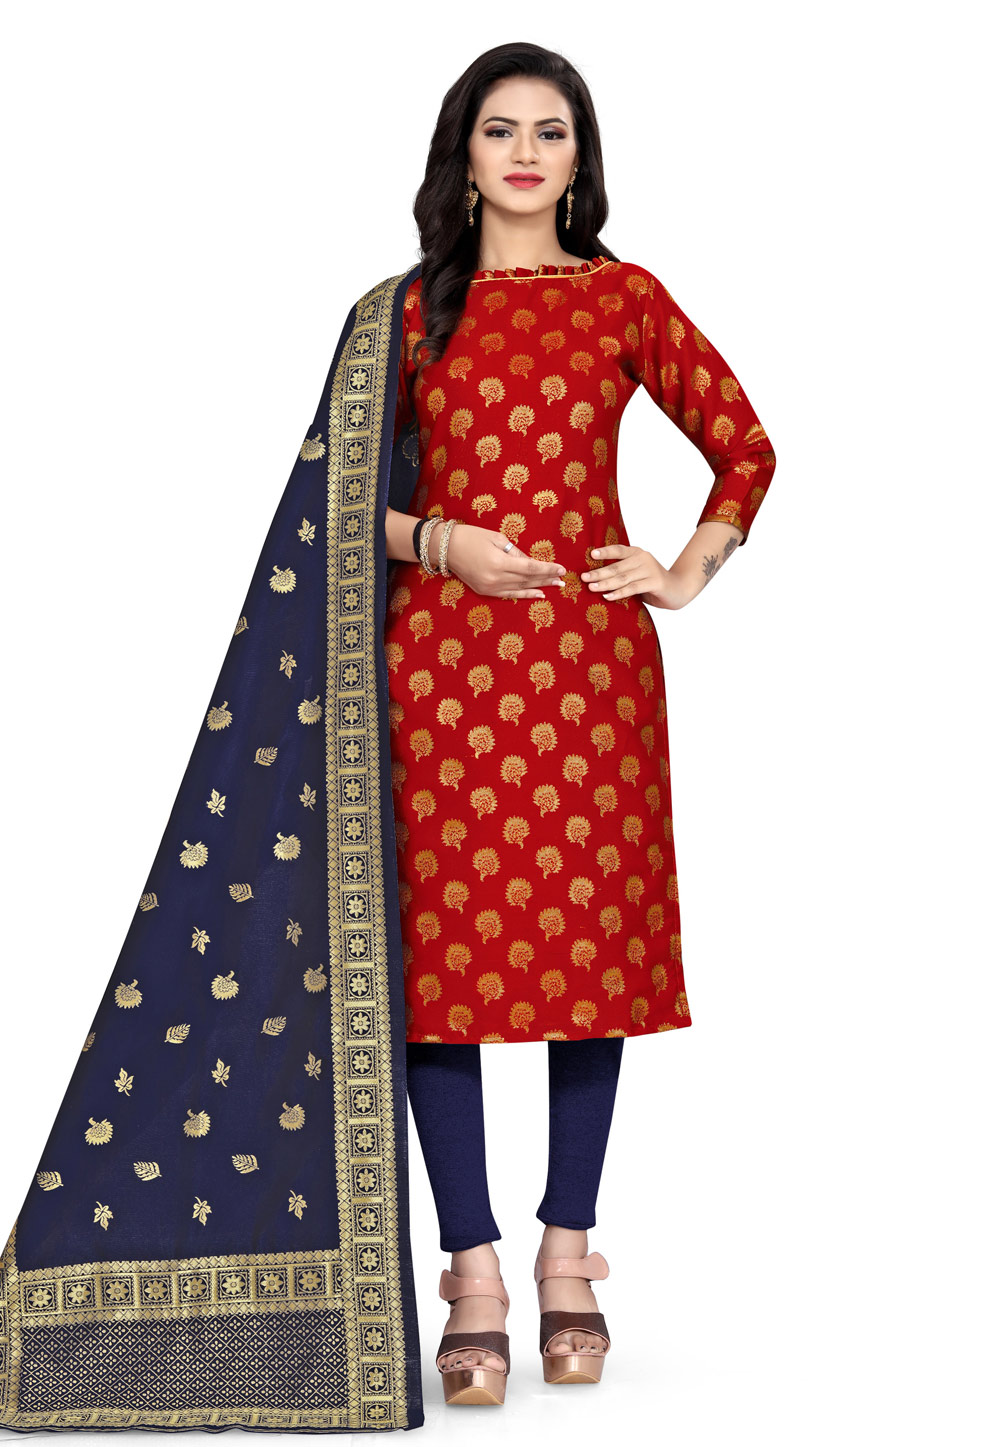 Naira Cut Suit Party Wear - Buy Naira Cut Suit Party Wear online at Best  Prices in India | Flipkart.com